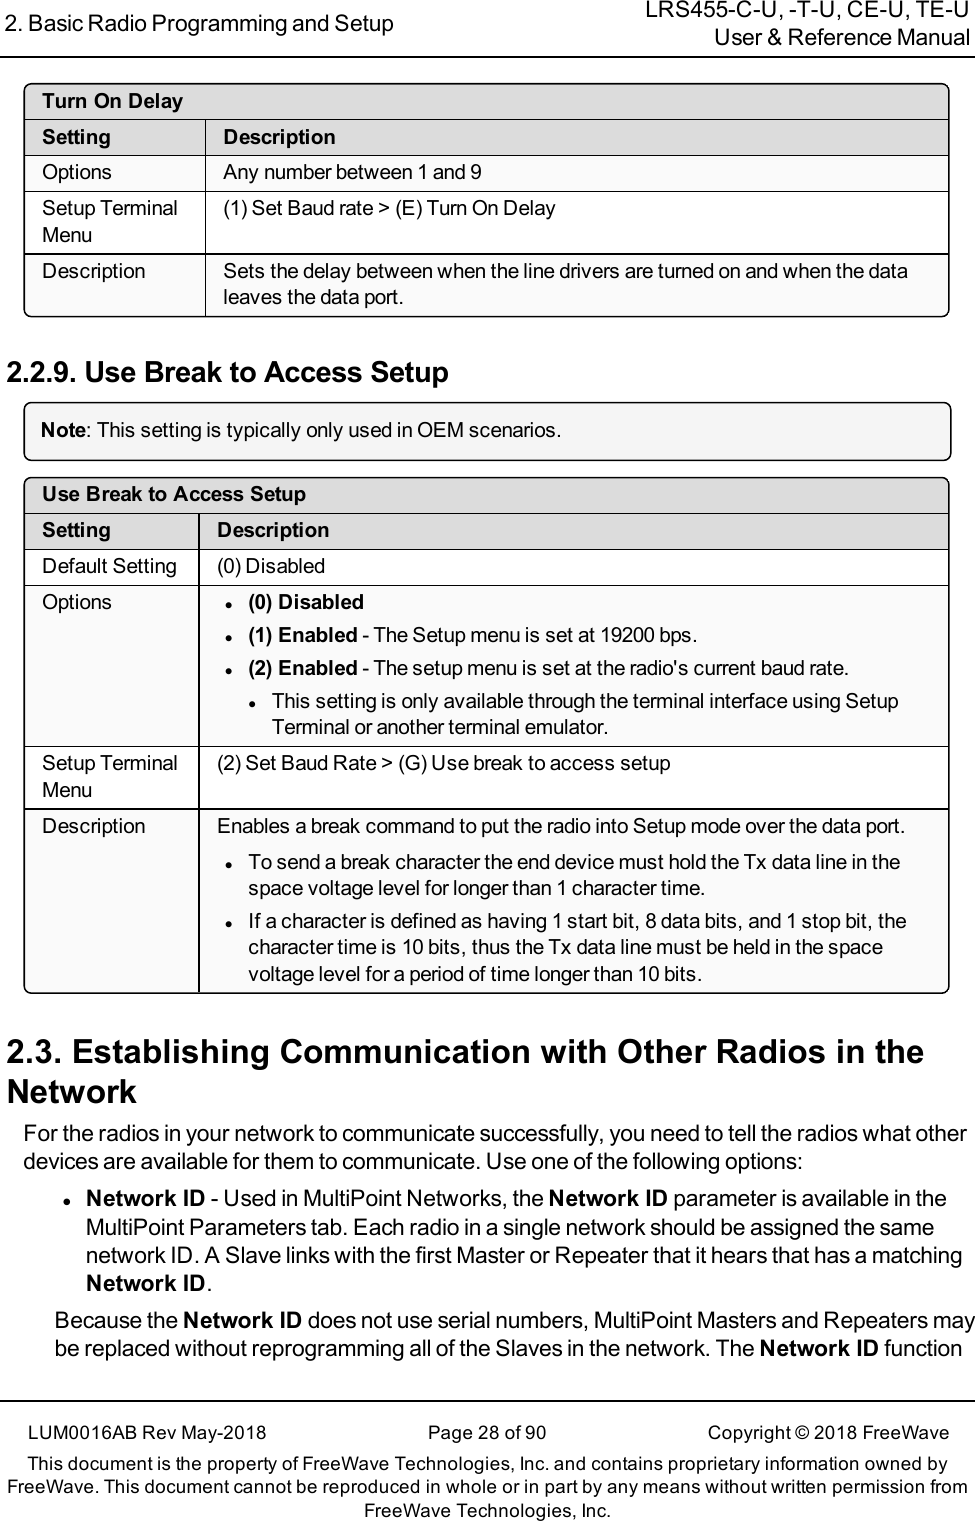 2. Basic Radio Programming and Setup LRS455-C-U, -T-U, CE-U, TE-UUser &amp; Reference ManualLUM0016AB Rev May-2018 Page 28 of 90 Copyright © 2018FreeWaveThis document is the property of FreeWave Technologies, Inc. and contains proprietary information owned byFreeWave. This document cannot be reproduced in whole or in part by any means without written permission fromFreeWave Technologies, Inc.Turn On DelaySetting DescriptionOptions Any number between 1 and 9Setup TerminalMenu(1) Set Baud rate &gt; (E) Turn On DelayDescription Sets the delay between when the line drivers are turned on and when the dataleaves the data port.2.2.9. Use Break to Access SetupNote: This setting is typically only used in OEM scenarios.Use Break to Access SetupSetting DescriptionDefault Setting (0) DisabledOptions l(0) Disabledl(1) Enabled - The Setup menu is set at 19200 bps.l(2)Enabled - The setup menu is set at the radio&apos;s current baud rate.lThis setting is only available throughthe terminal interface using SetupTerminal or another terminal emulator.Setup TerminalMenu(2) Set Baud Rate &gt; (G) Use break to access setupDescription Enables a break command to put the radio into Setup mode over the data port.lTo send a break character the end device must hold the Tx data line in thespace voltage level for longer than 1 character time.lIf a character is defined as having 1 start bit, 8 data bits, and 1 stop bit, thecharacter time is 10 bits, thus the Tx data line must be held in the spacevoltage level for a period of time longer than 10 bits.2.3. Establishing Communication with Other Radios in theNetworkFor the radios in your network to communicate successfully, you need to tell the radios what otherdevices are available for them to communicate. Use one of the following options:lNetwork ID - Used in MultiPoint Networks, the Network ID parameter is available in theMultiPoint Parameters tab. Each radio in a single network should be assigned the samenetwork ID. A Slave links with the first Master or Repeater that it hears that has a matchingNetwork ID.Because the Network ID does not use serial numbers, MultiPoint Masters and Repeaters maybe replaced without reprogramming all of the Slaves in the network. The Network ID function